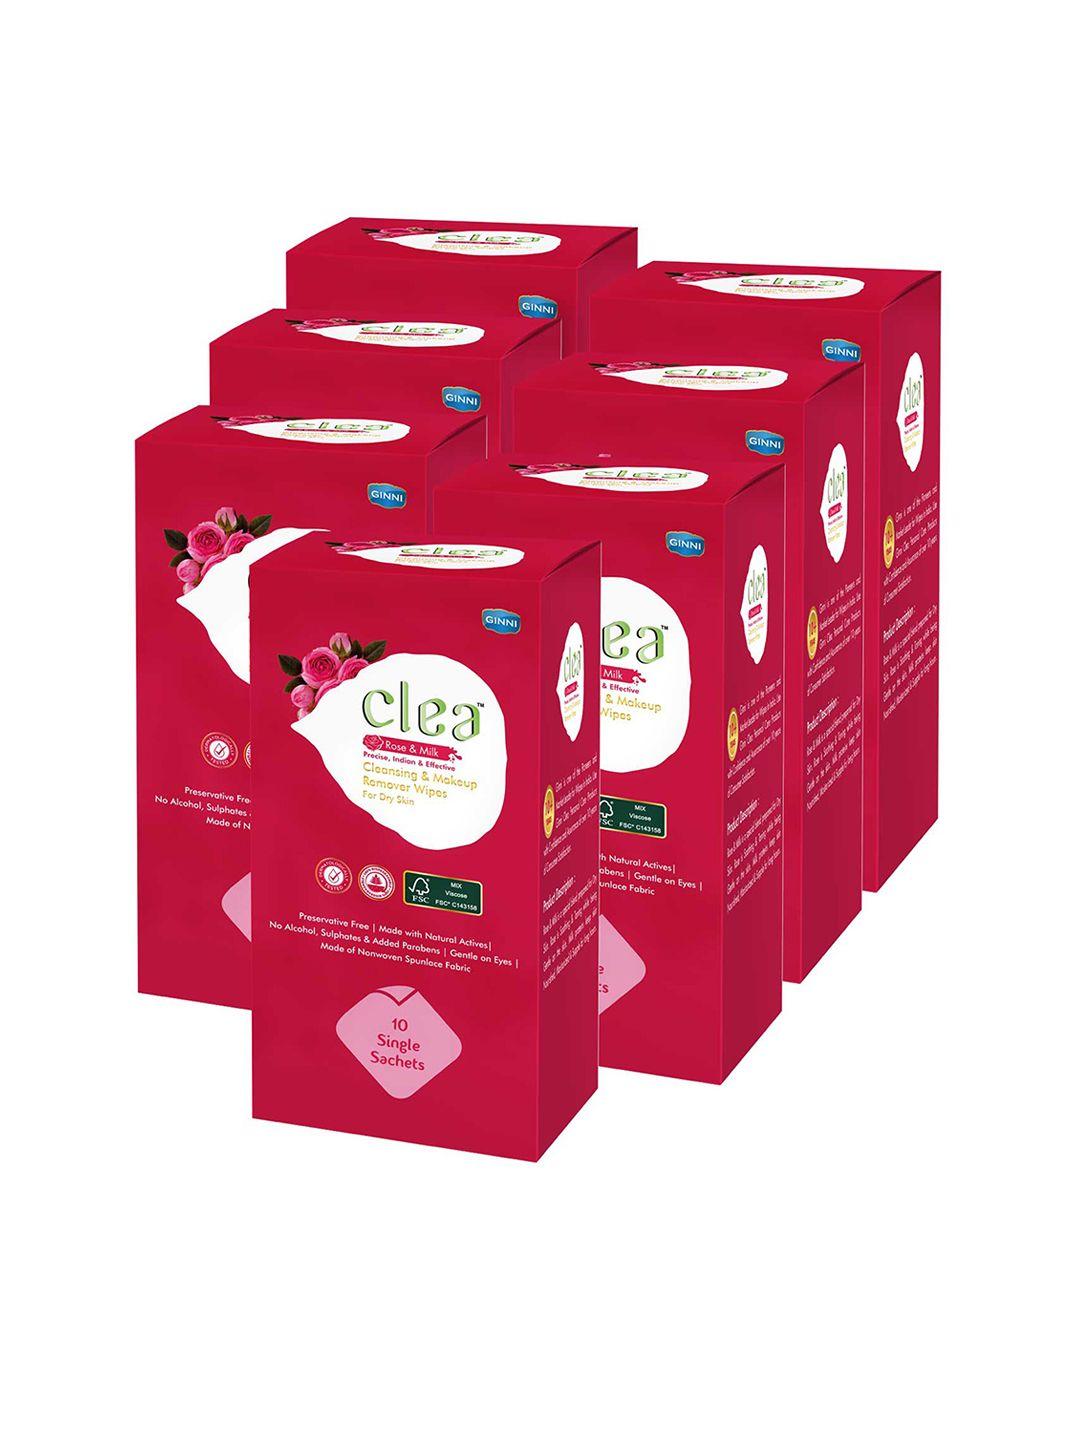 clea set of 7 rose & milk cleansing & makeup remover wet wipes - 10 pulls each